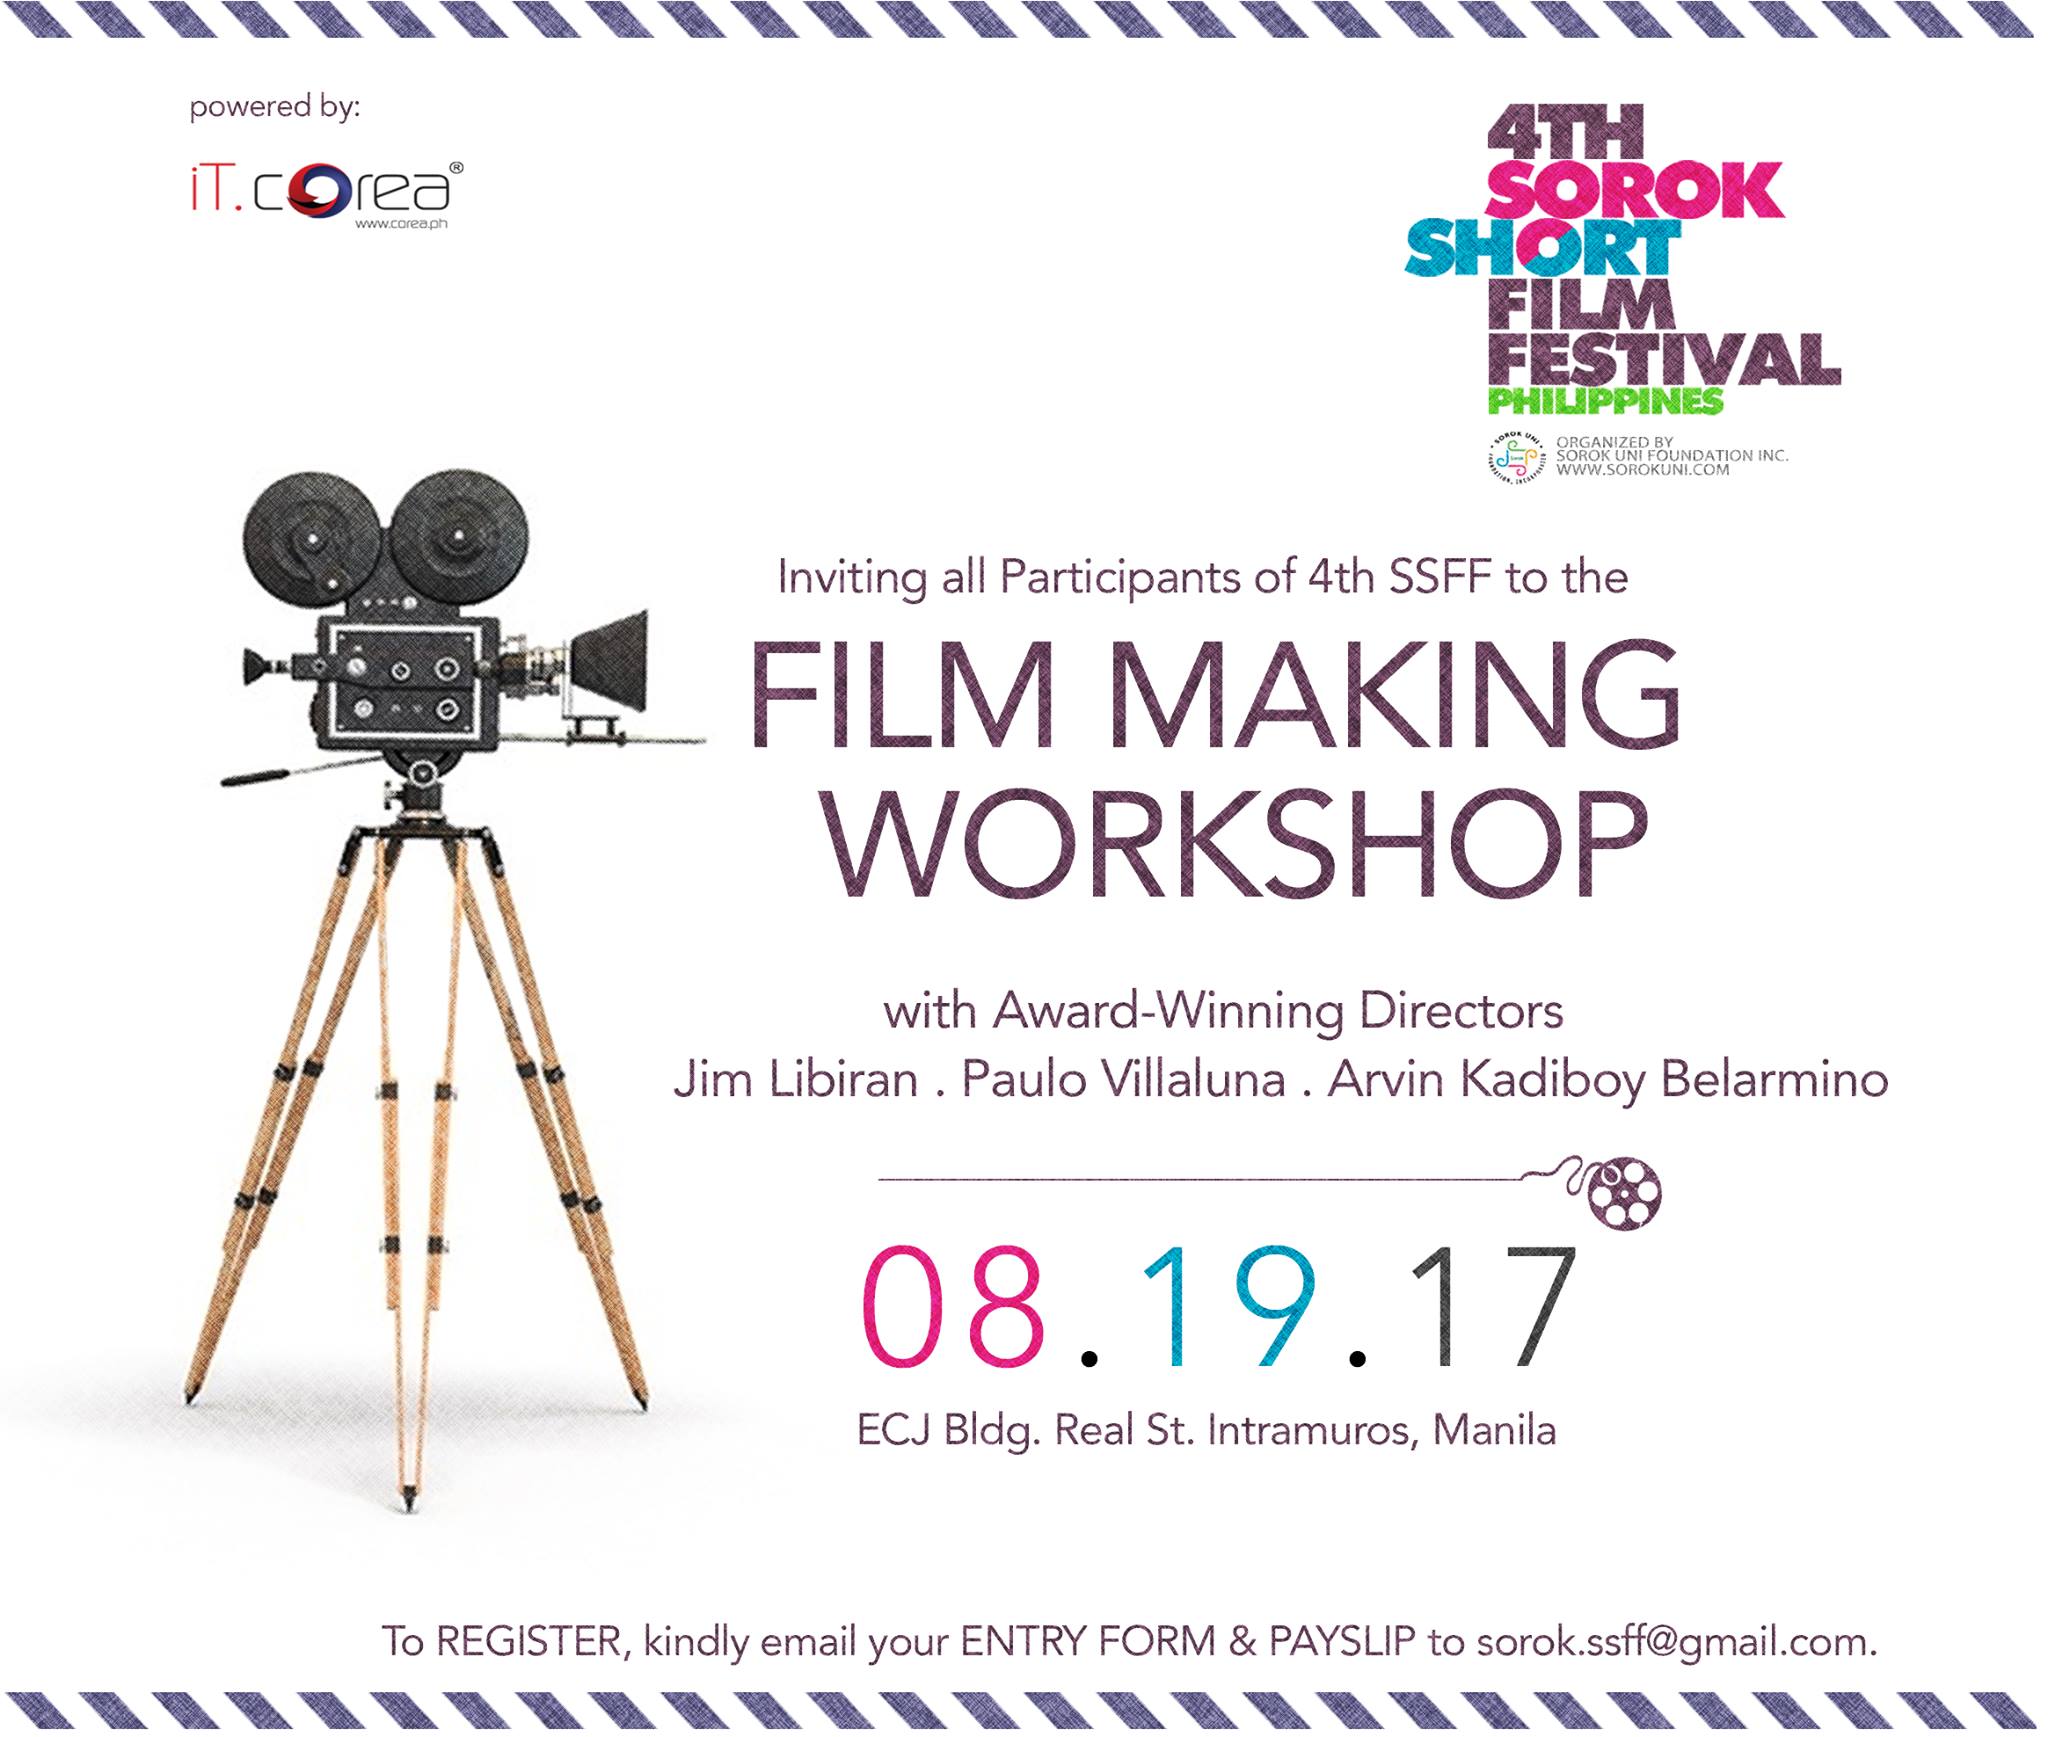 Sorok Short Film Festival‎4TH SSFF Filmmaking Workshop Page Liked · August 2 · 4TH SSFF Filmmaking Workshop Public · Hosted by Sorok Short Film Festival InterestedShare clock Saturday at 8 AM - 5 PM 5 days from now · 27–32°Heavy Thunderstorm pin Show Map Intramuros, Manila Details ANNOUNCEMENT: All participants of 4TH SSFF who will be registering before August 15, 2017 are entitled to a Filmmaking Workshop to be held on August 19, 2017 in Intramuros, Manila for FREE. Kindly send us a private message for more details. This shall be facilitated by Director Jim Libiran. The workshop will be organized solely for the participants of the 4th SOROK SHORT FILM FESTIVAL.